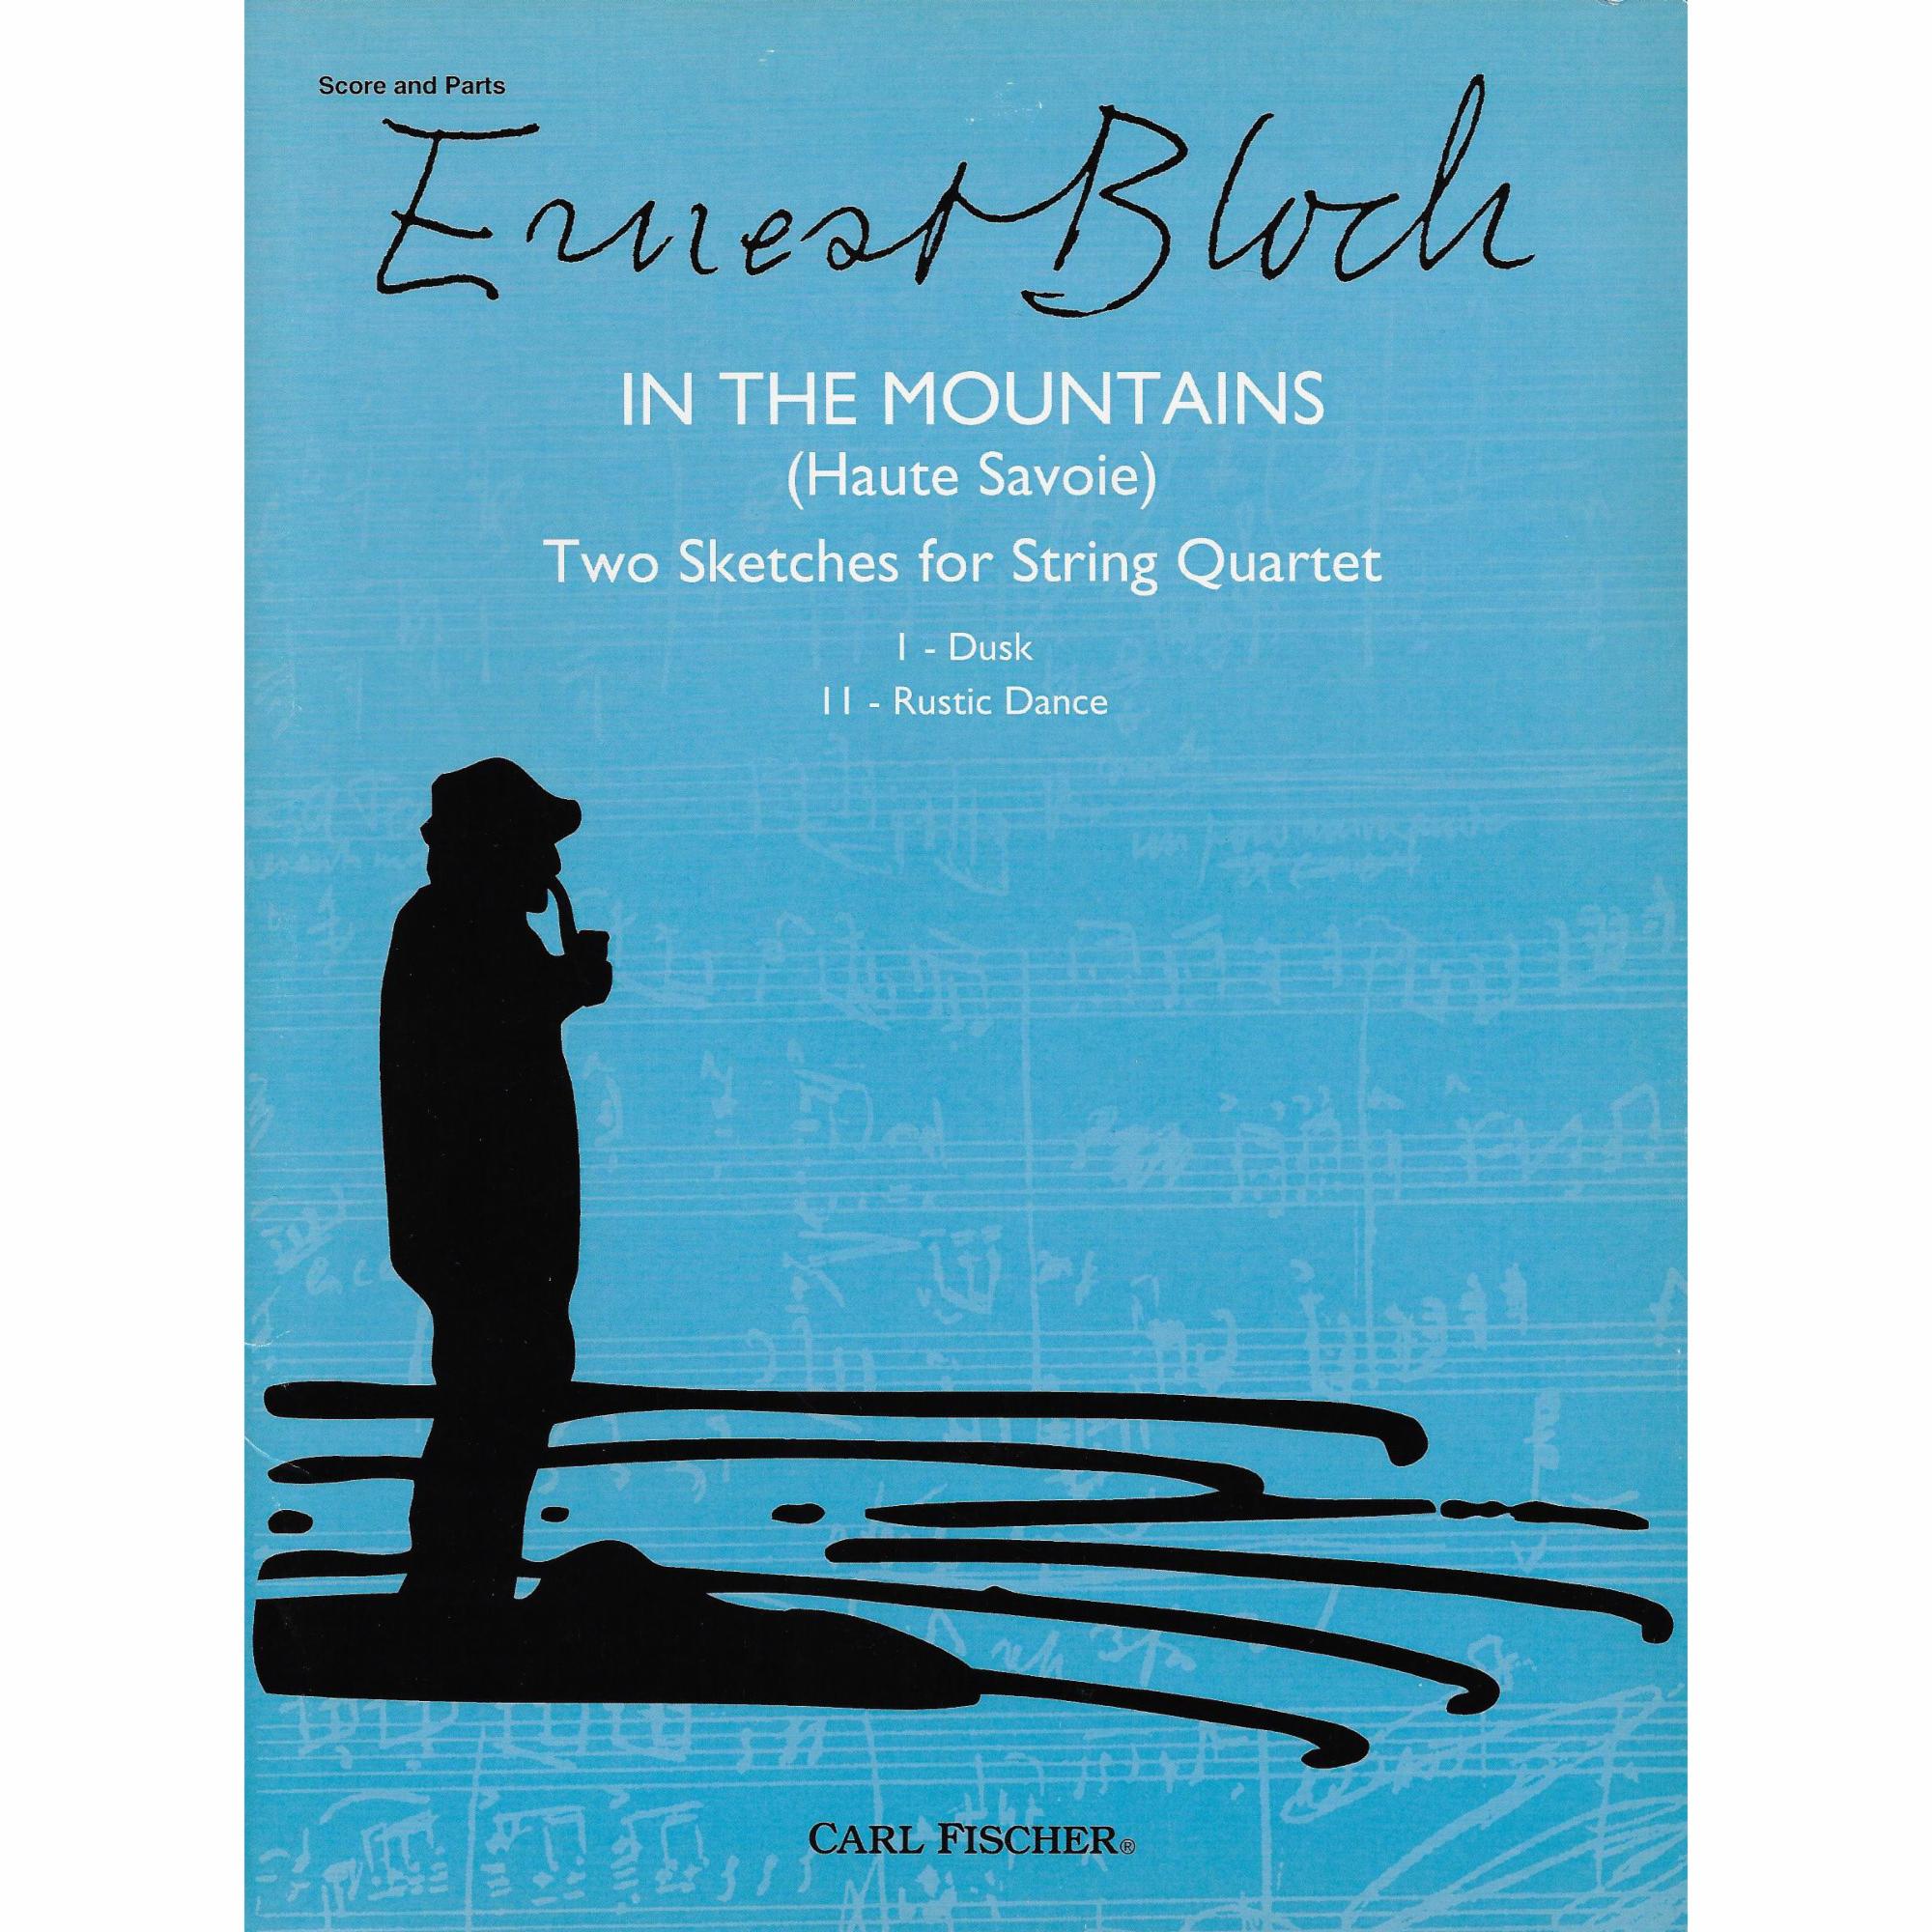 Bloch -- In the Mountains: Two Sketches for String Quartet